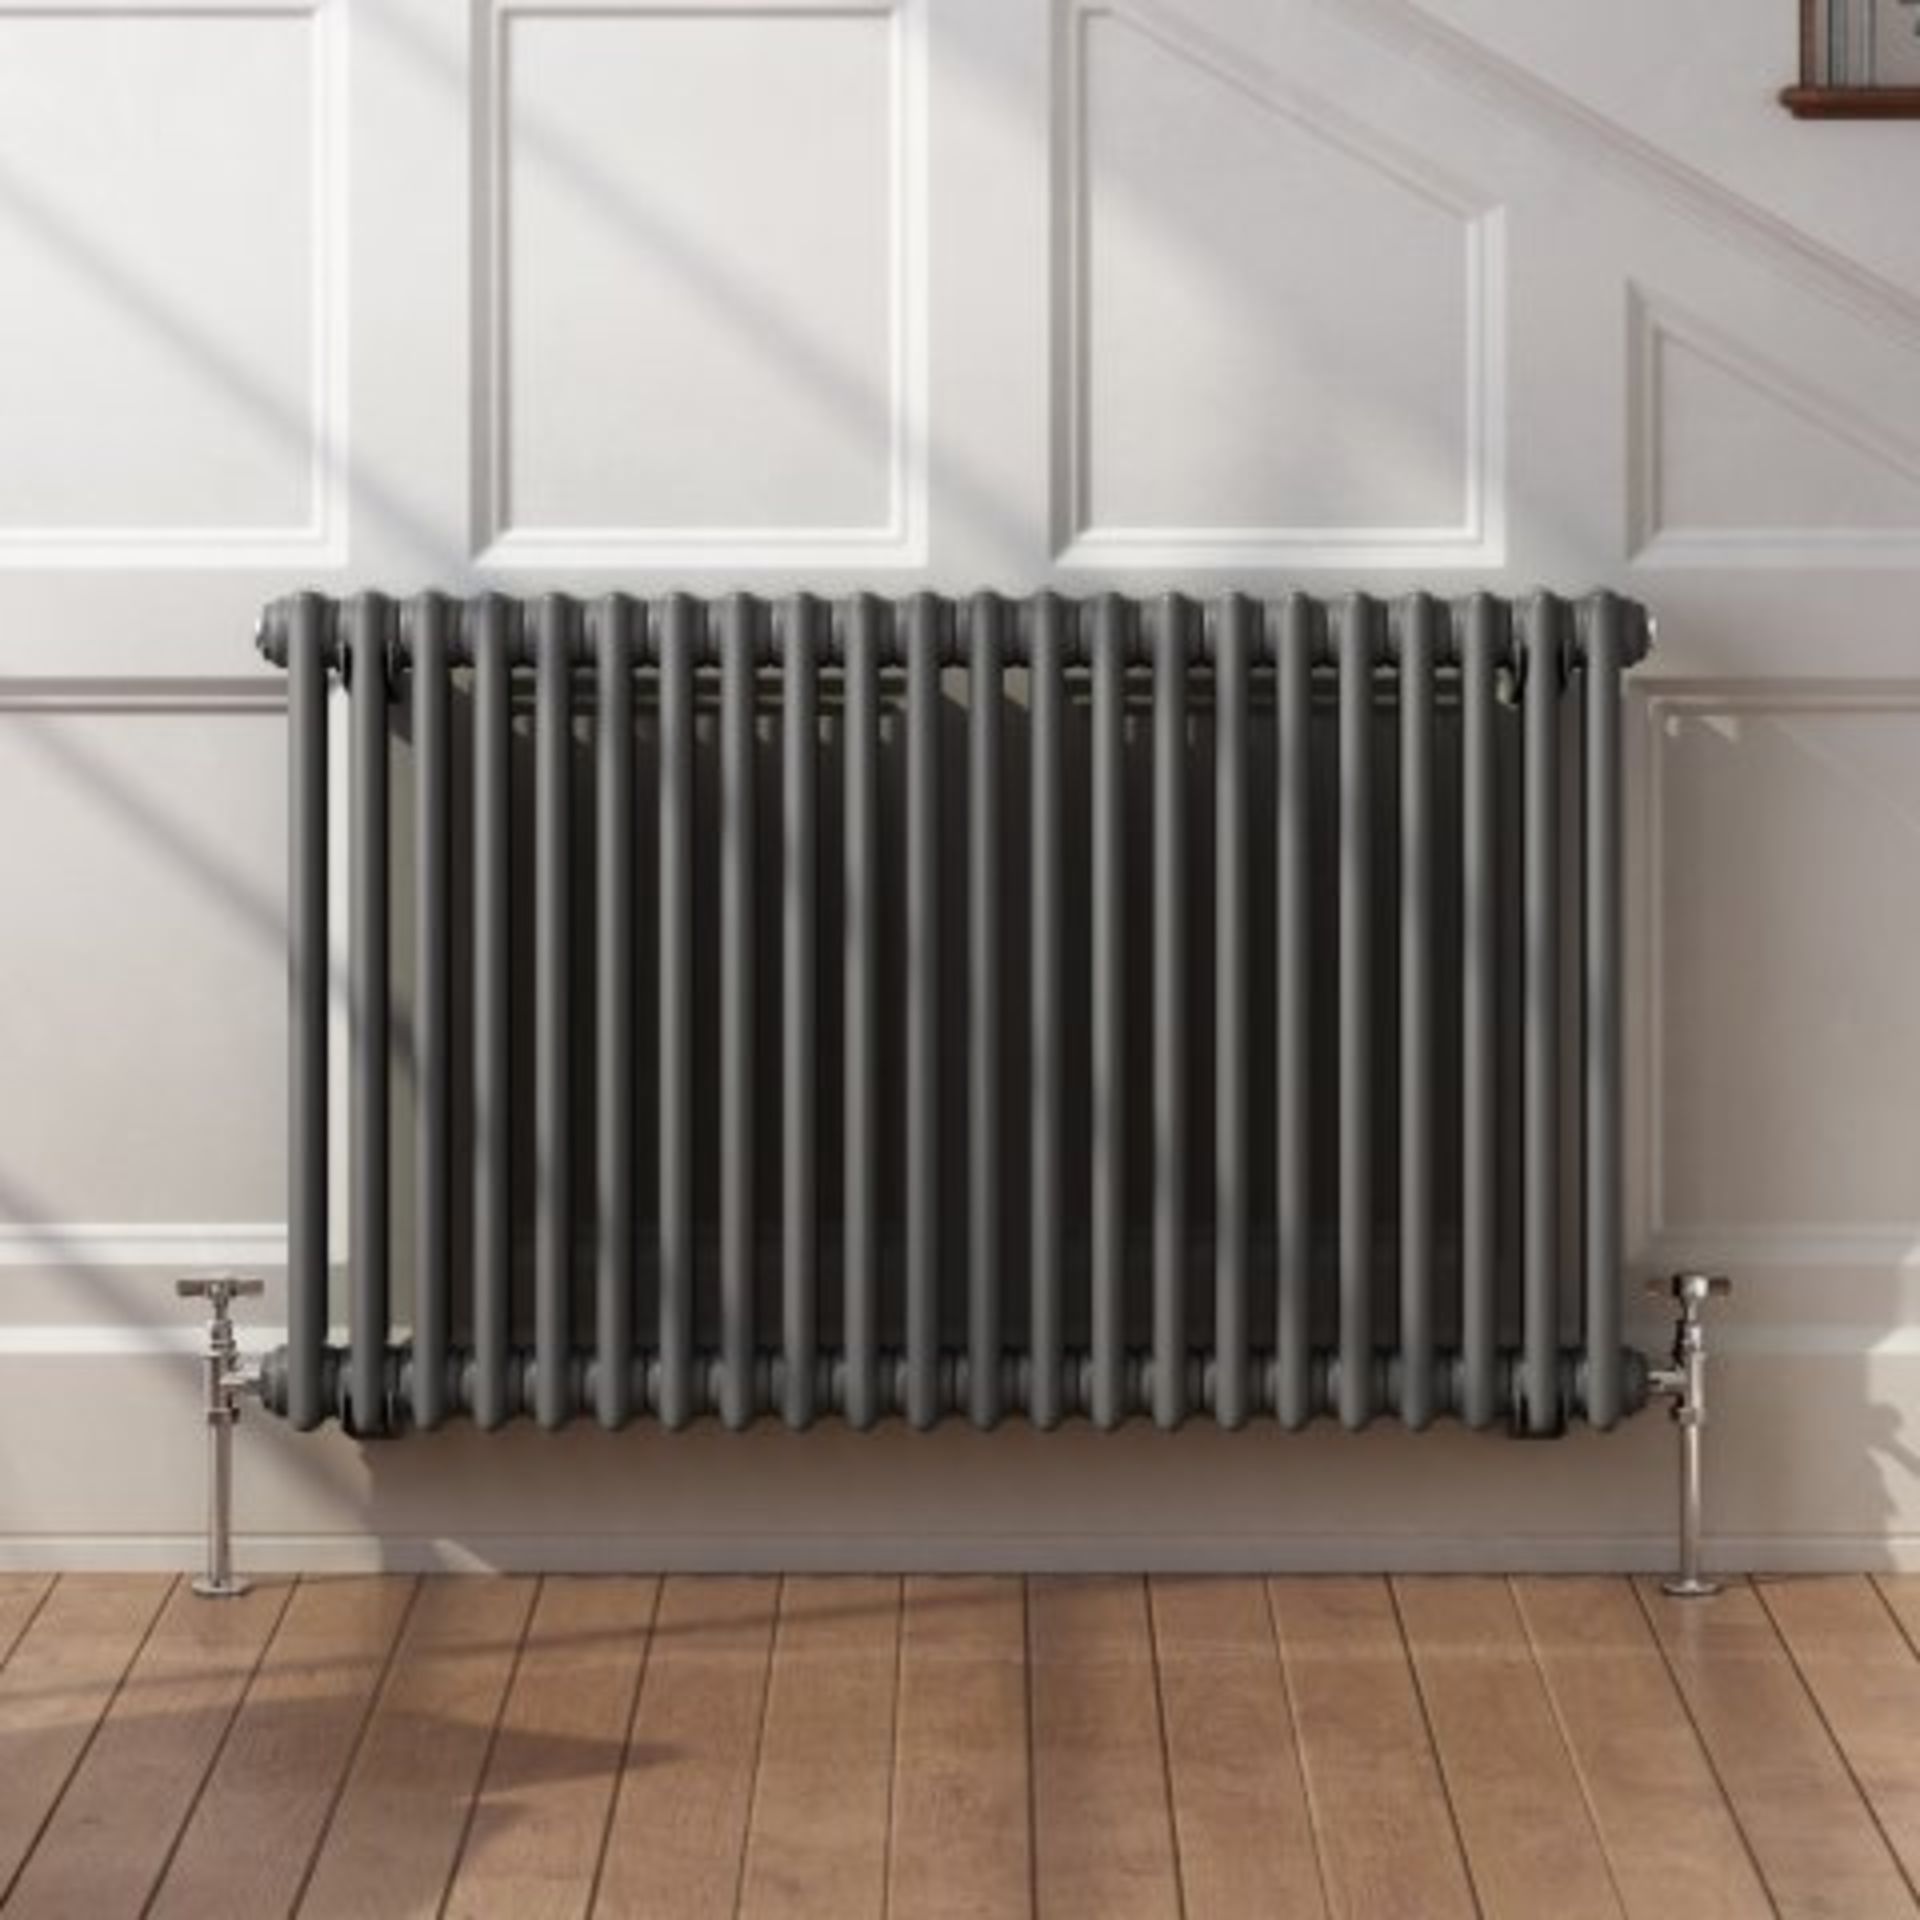 (O97) 600x1008 Anthracite Double Panel Horizontal Colosseum Traditional Radiator. RRP £524.99. - Image 3 of 5